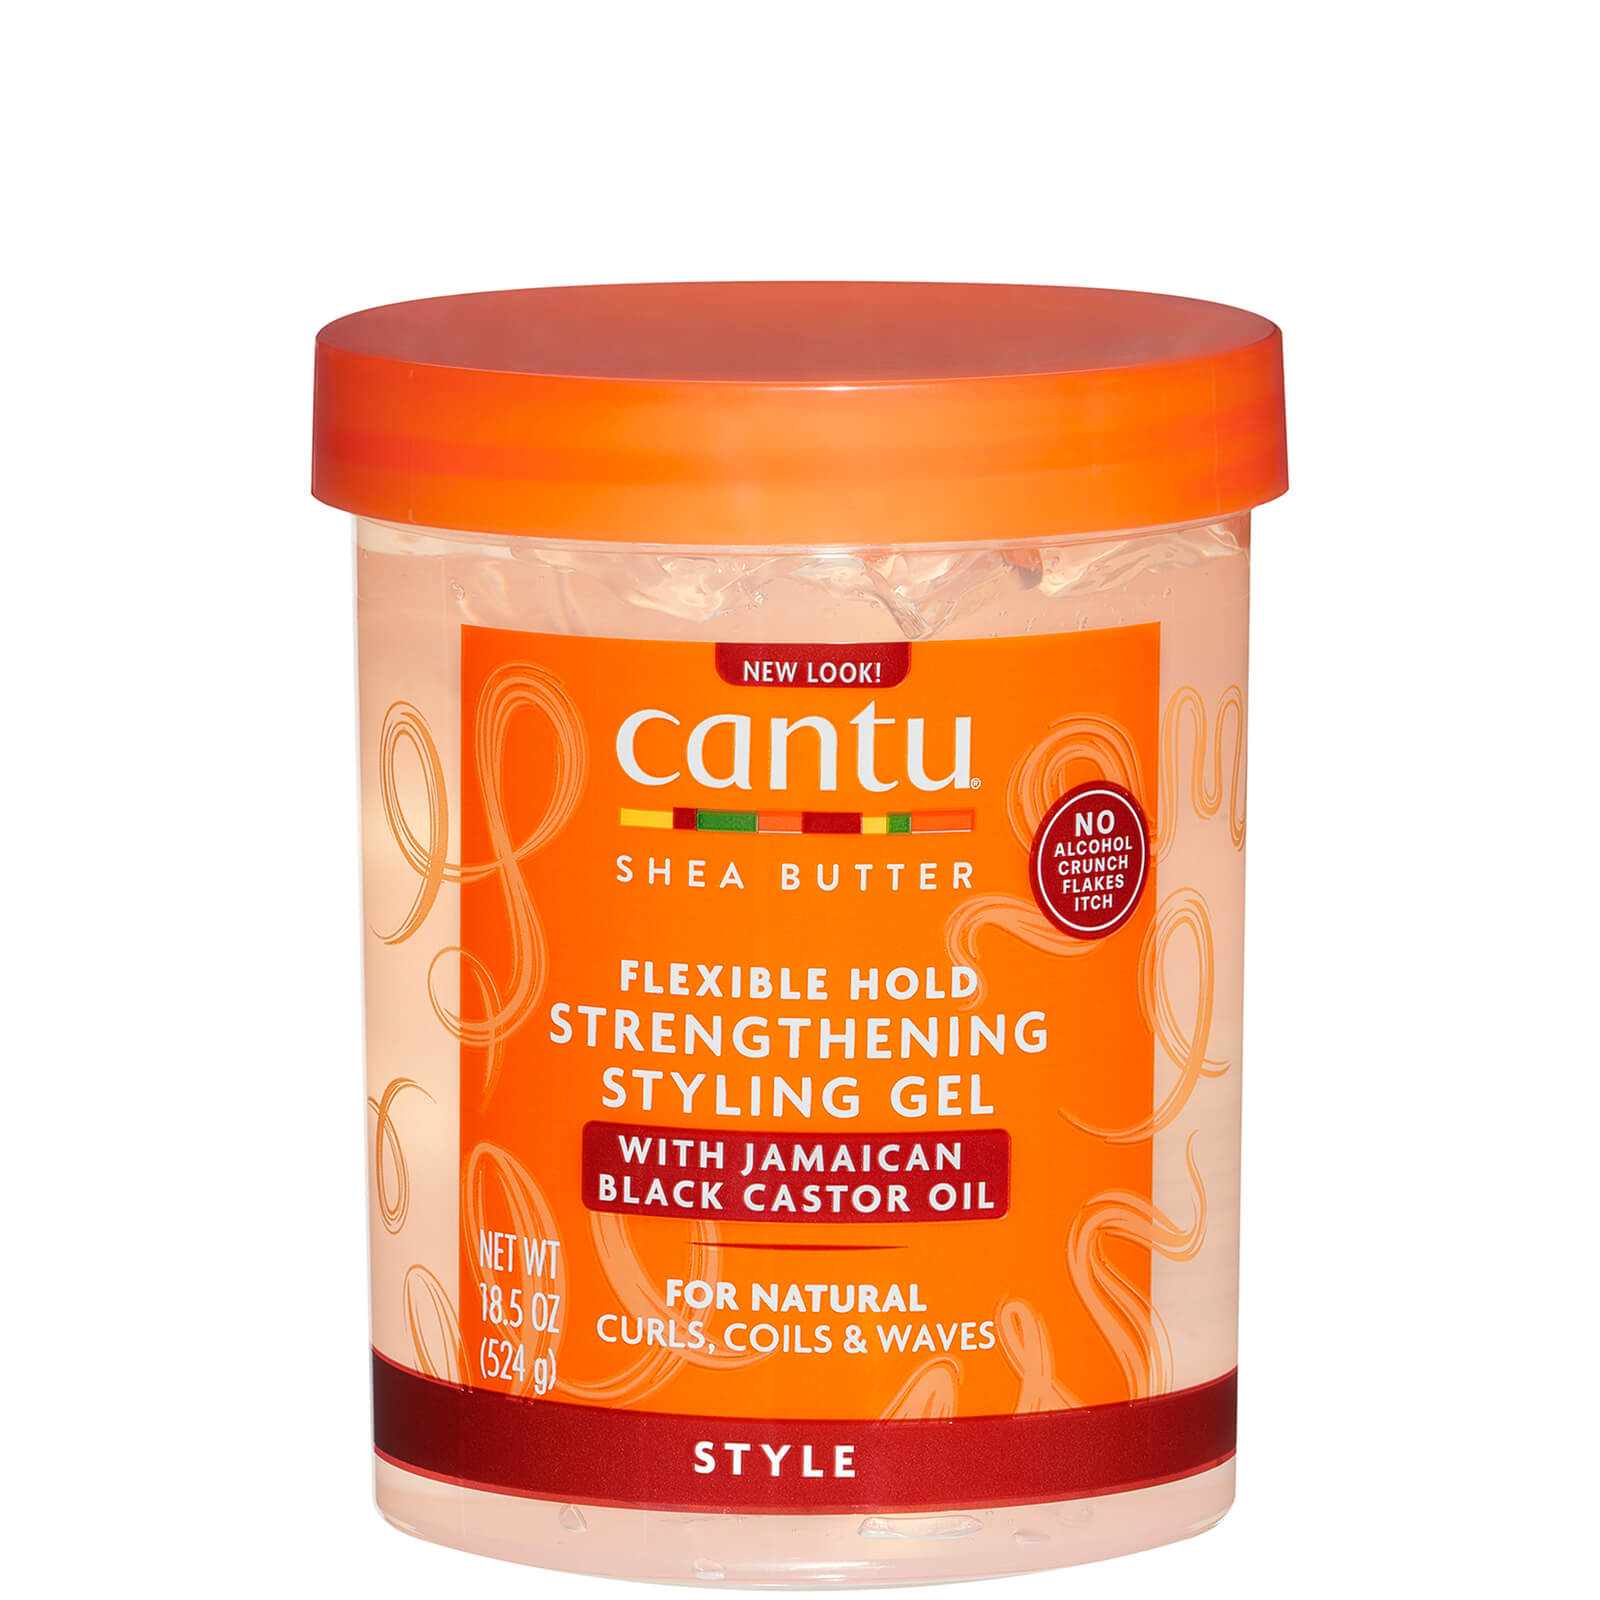 Photos - Hair Styling Product Cantu Shea Butter Flexible Hold Strengthening Styling Gel with Jamaican Bl 